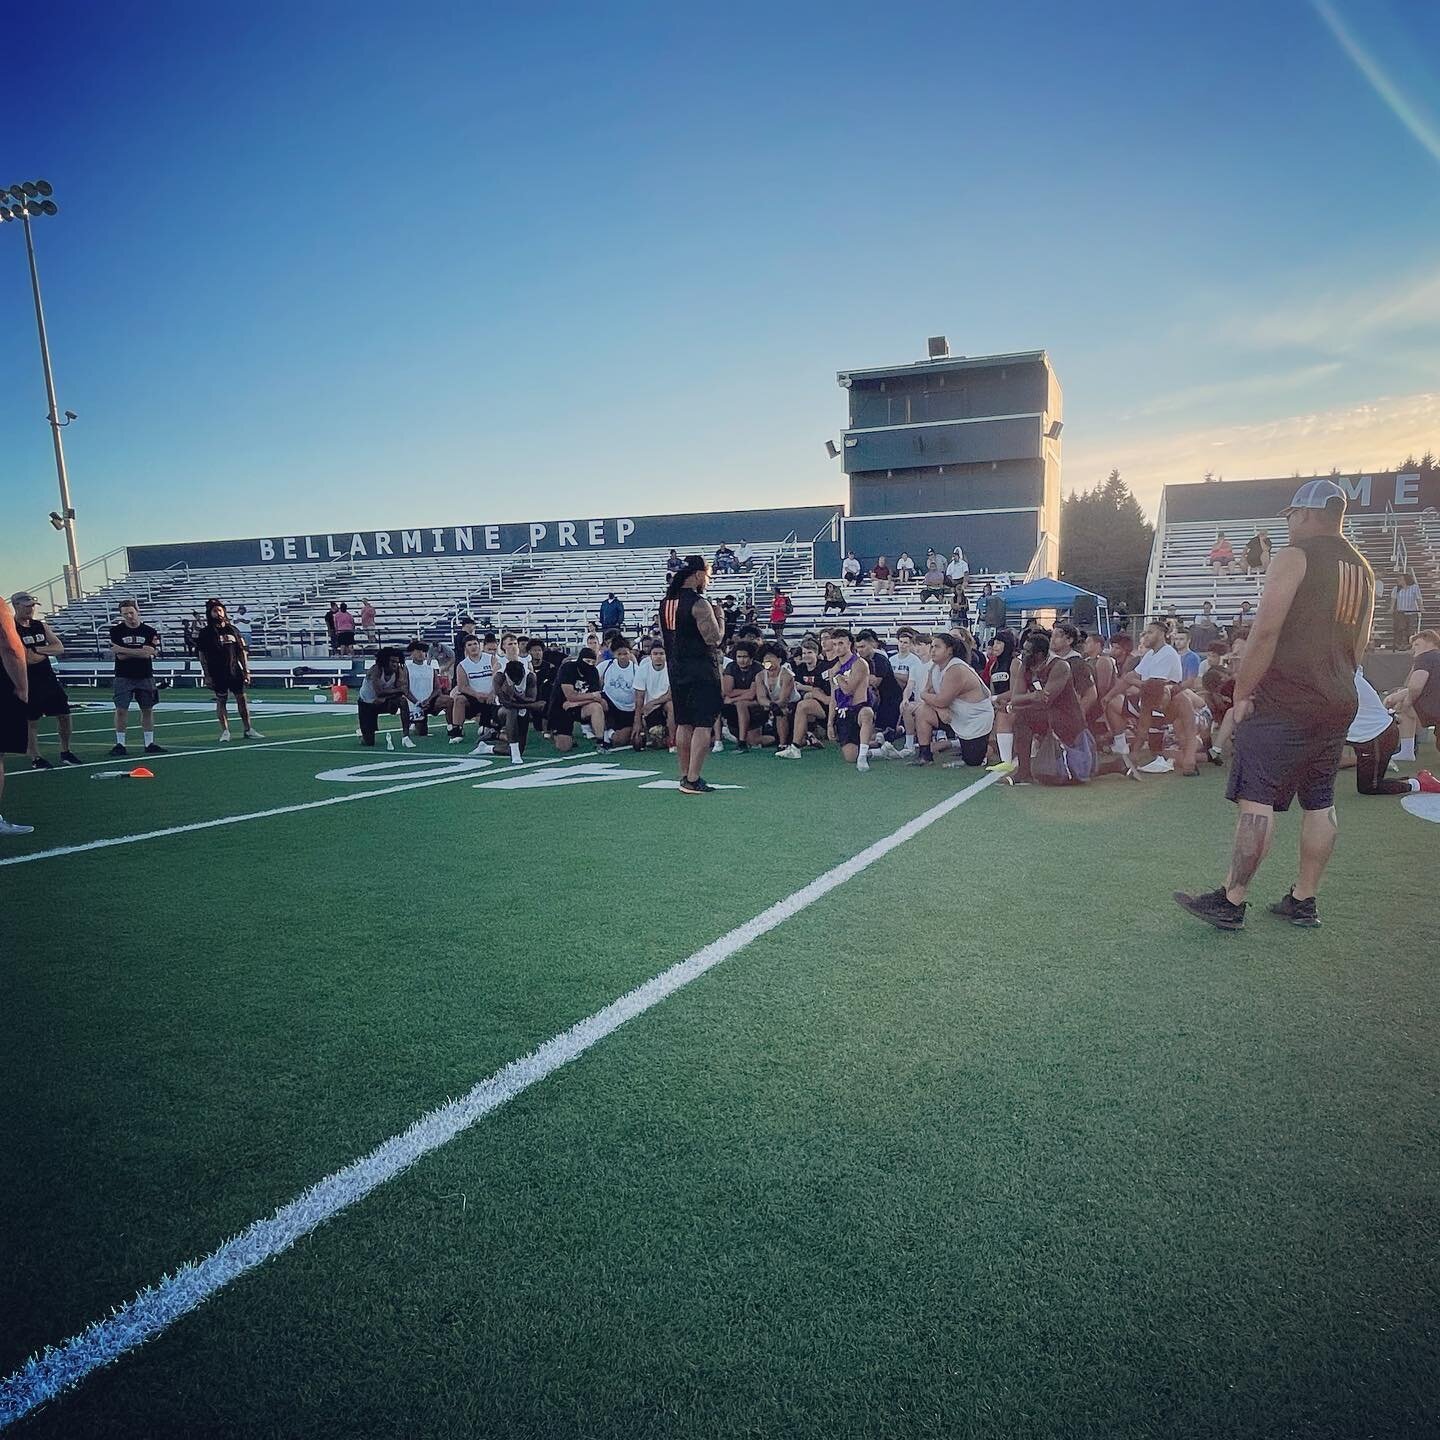 THANK YOU to all our athletes who came out and competed to earn their spot on JPS TEAM WASHINGTON!! 
.
.
.
.
.
#GridironAiga 
#GridironTrenches
#TeamGridiron
#GridironSP
#TrenchHOGz
#DQtrenchperformance
#DQEvans
#jpsteamwa 
#jpsonthemove